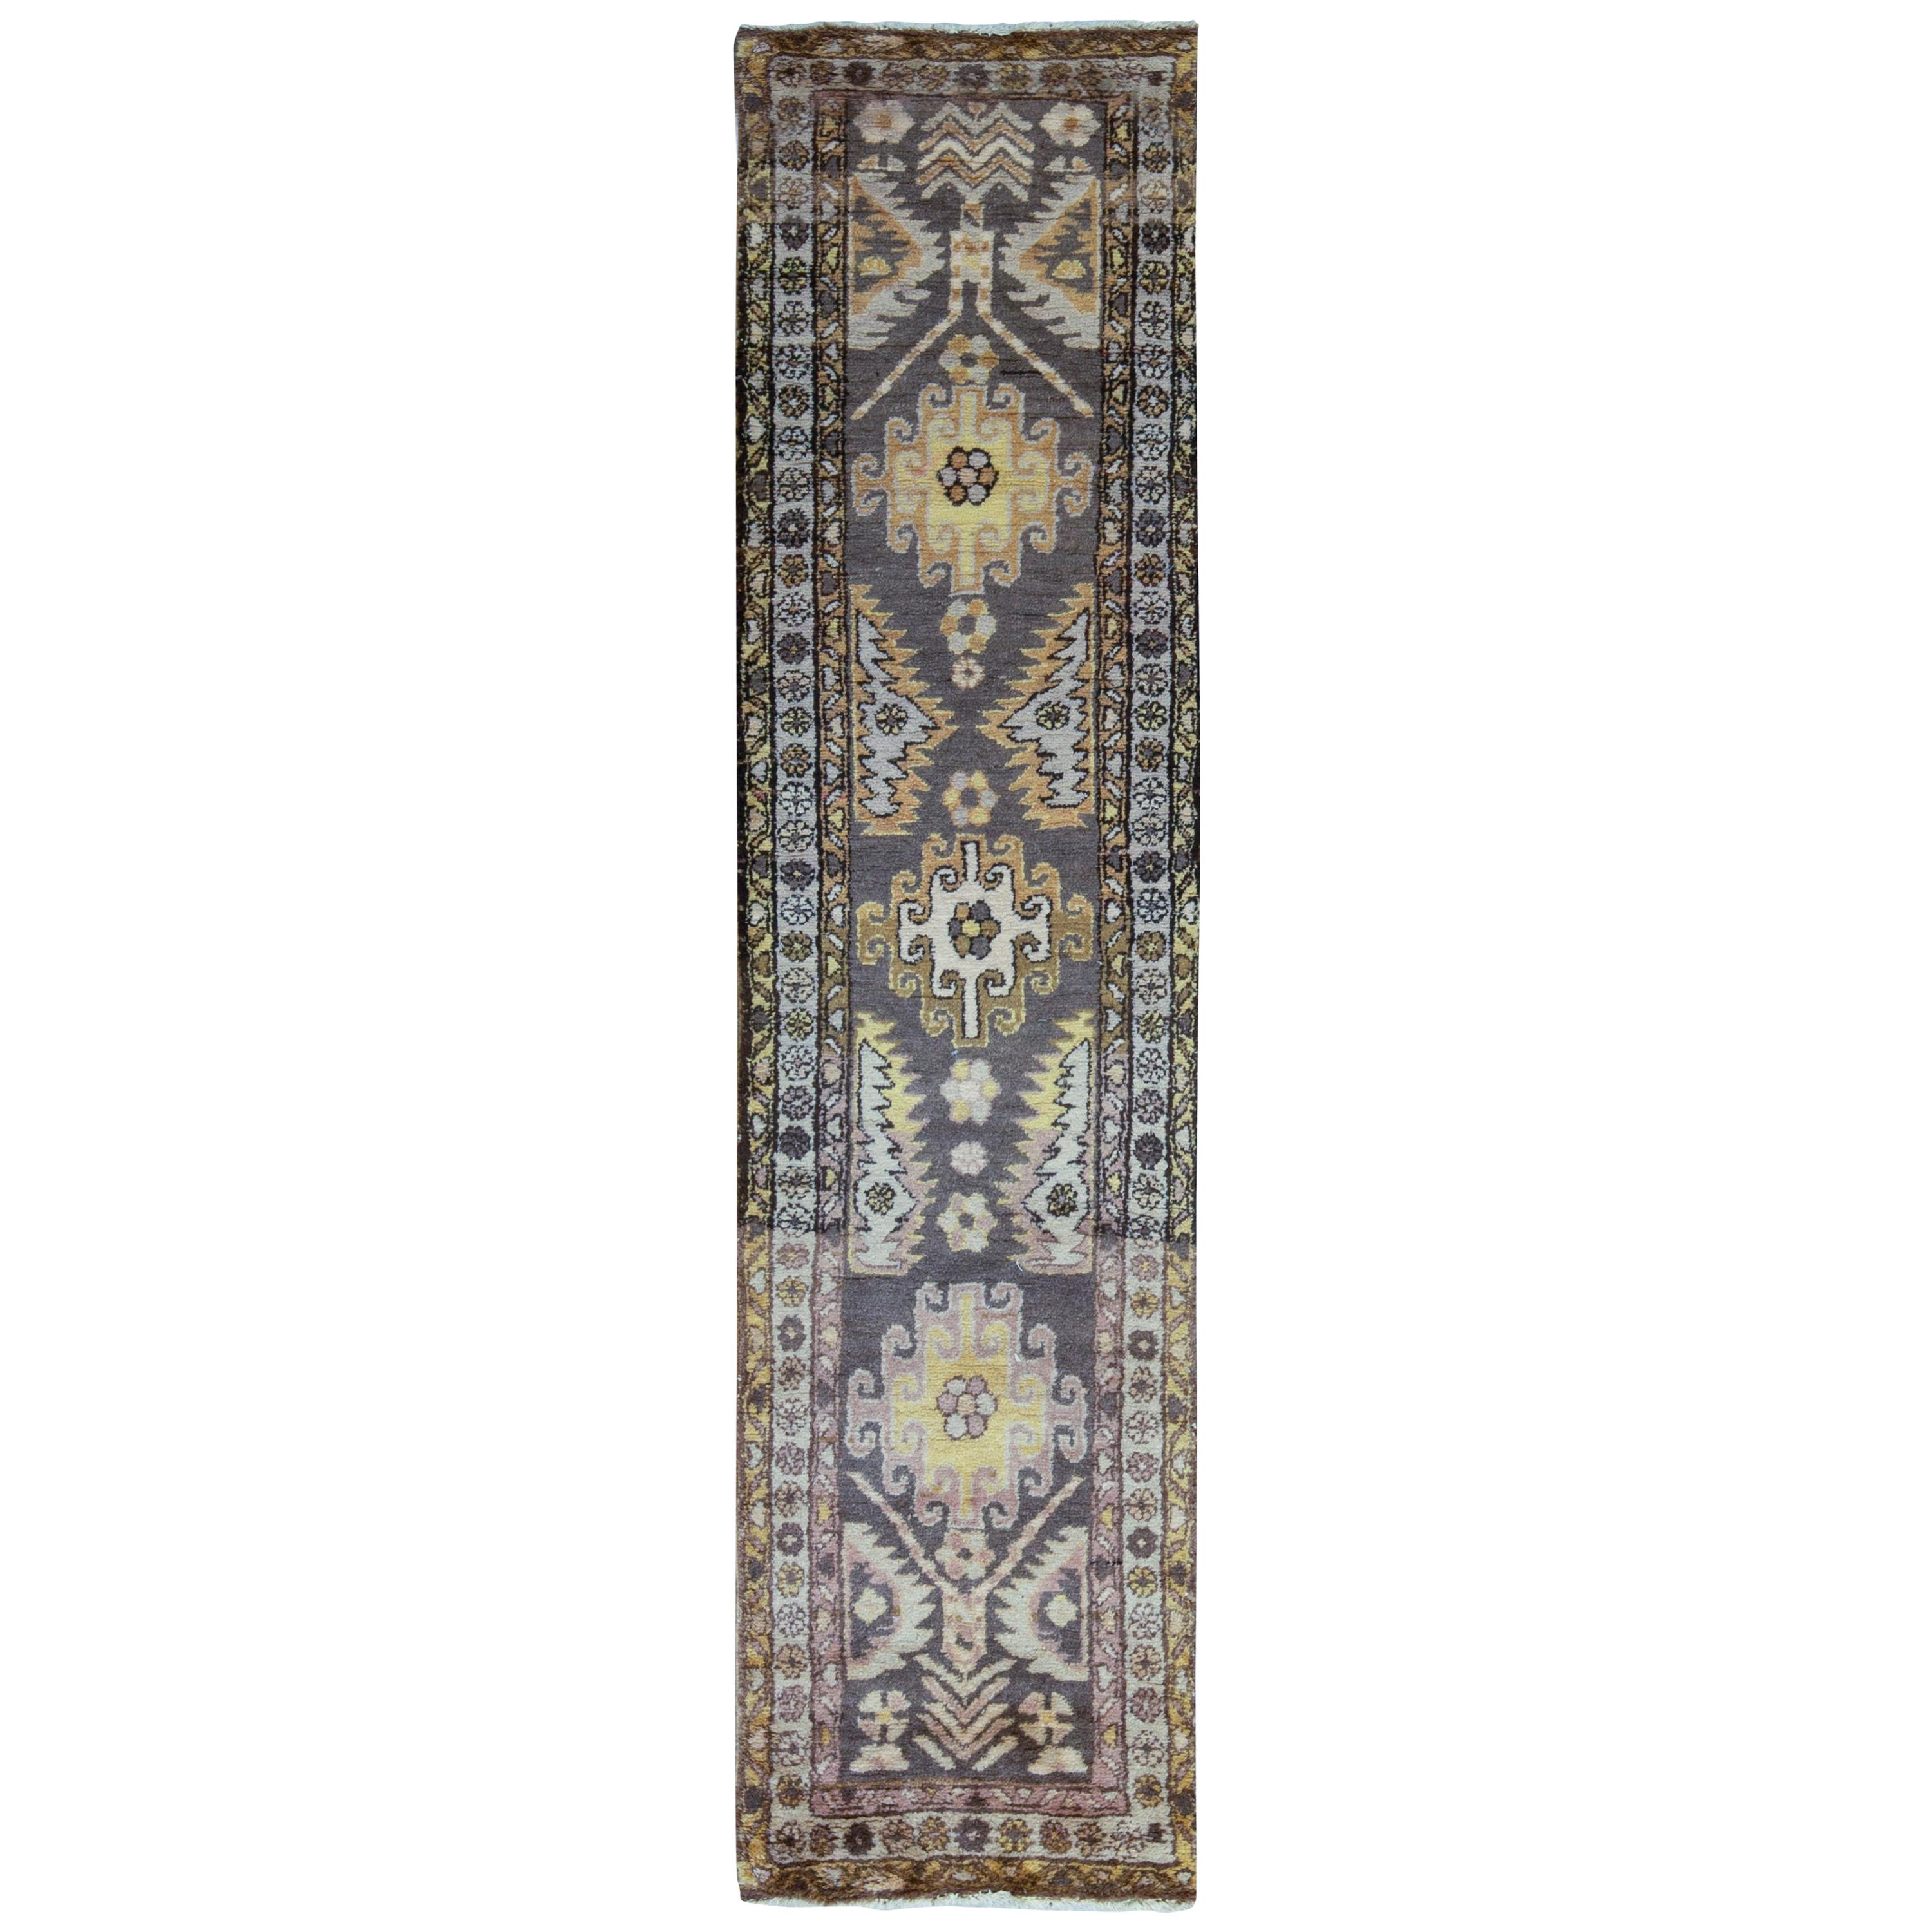 Traditional Handwoven Wool Runner Area Rug  2'6 x 12' For Sale